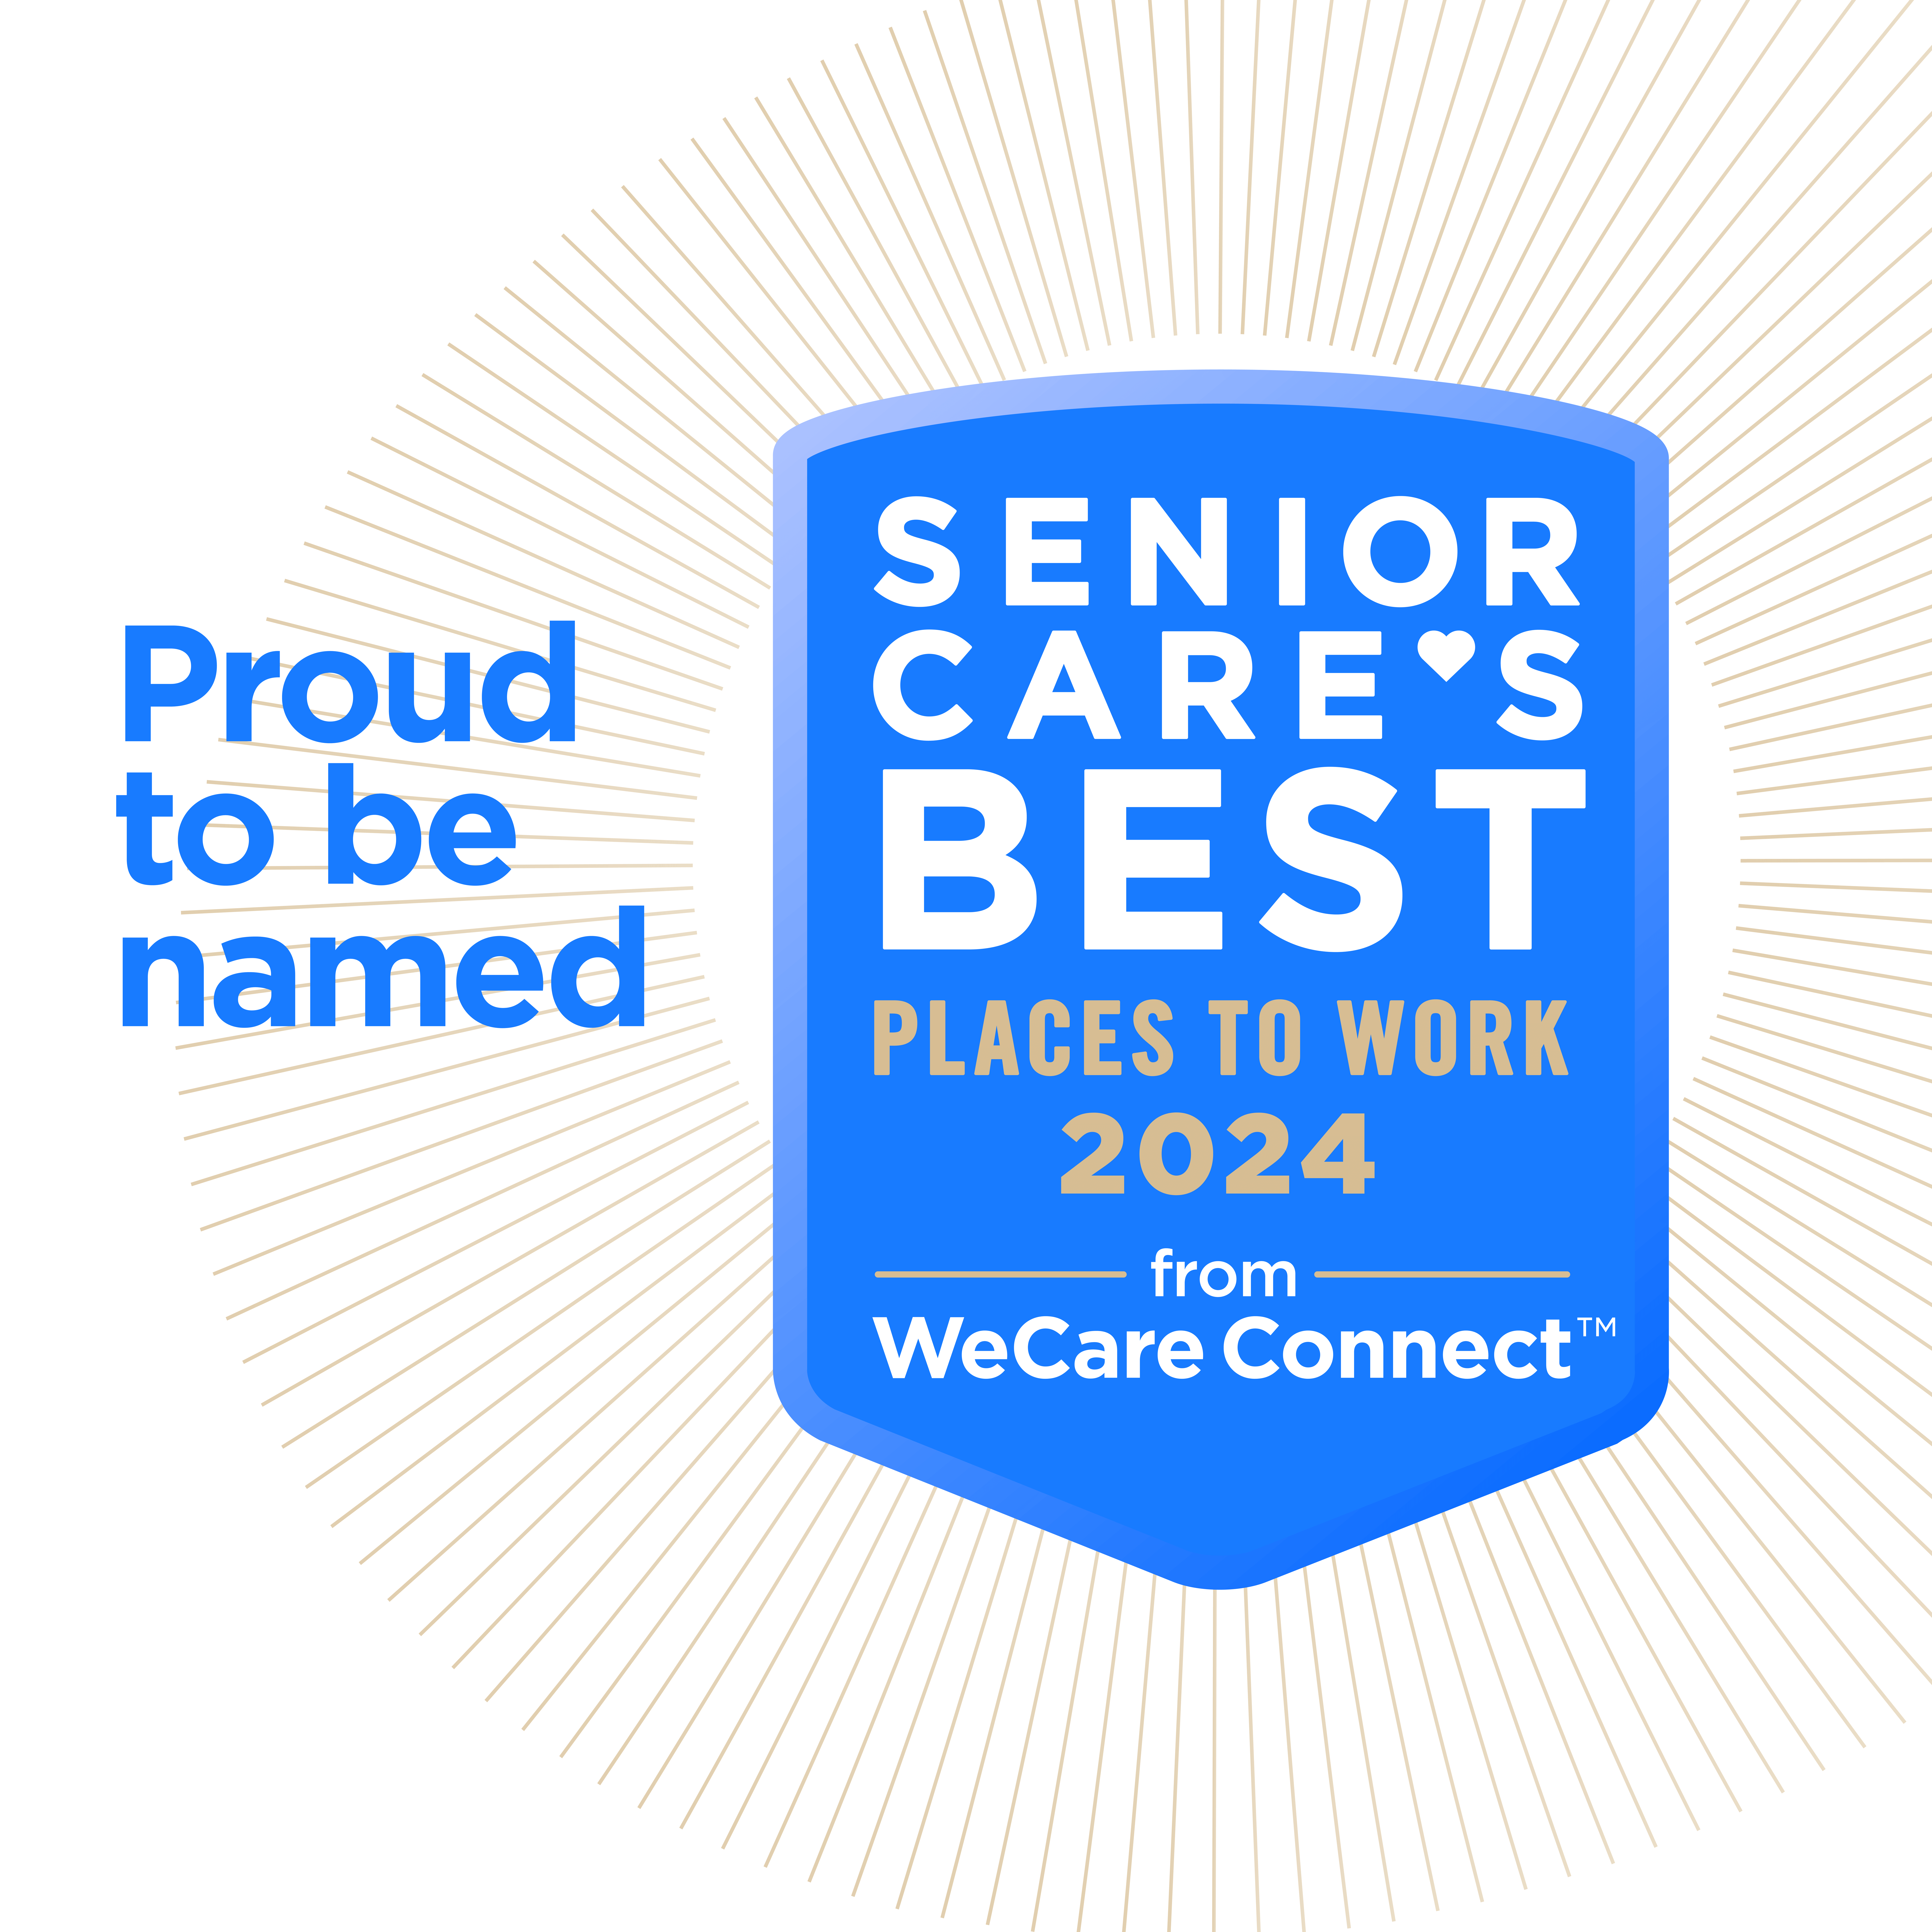 Trinity Woods Named one of Senior Care’s Best Places to Work!